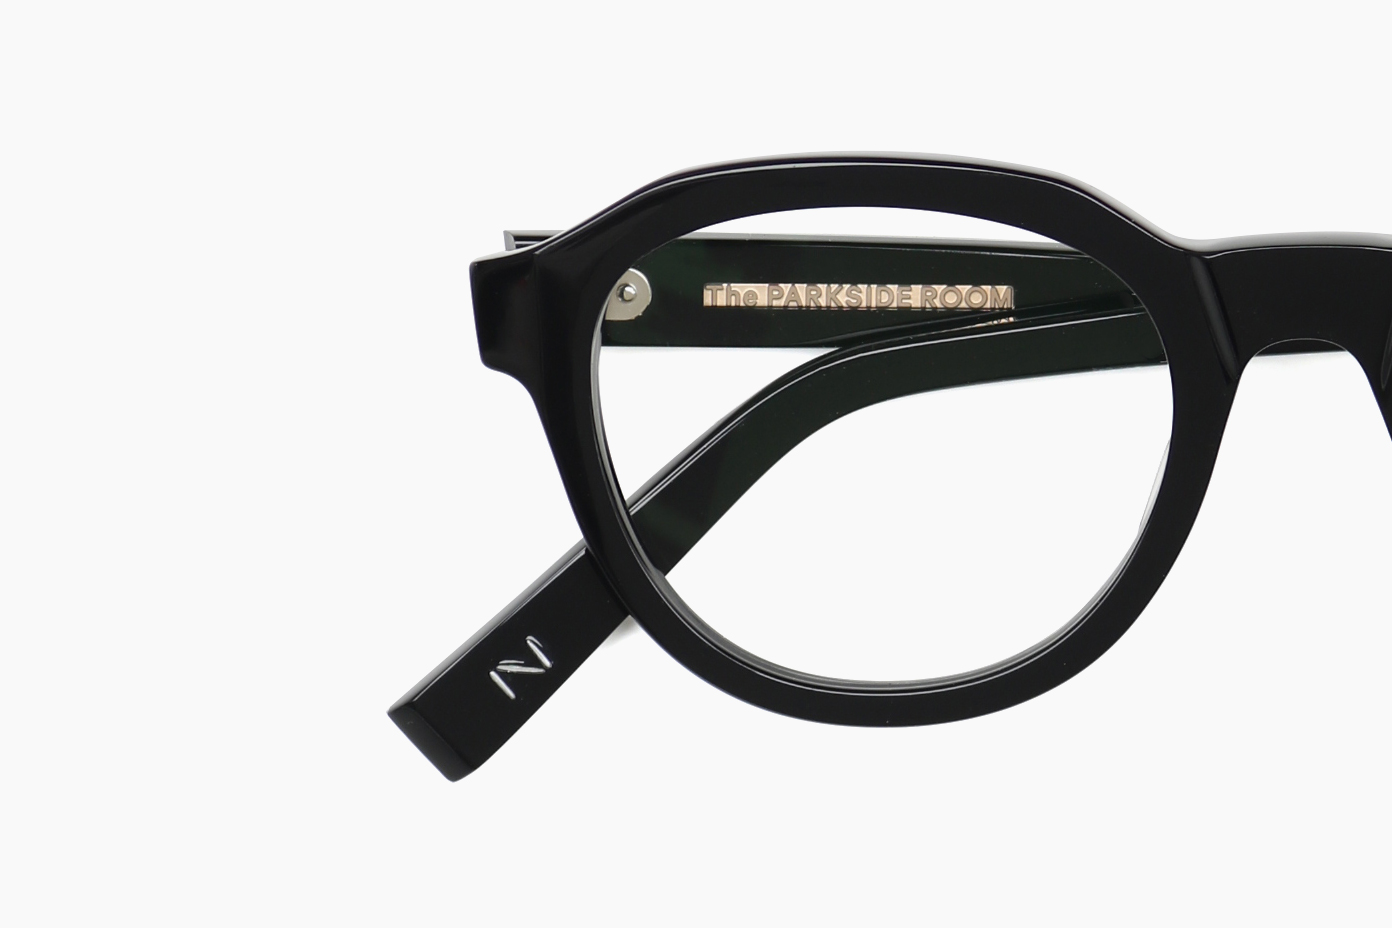 UNIVERSAL PRODUCTS. + Noritake x The PARKSIDE ROOM｜tpr-006 - Black｜The PARKSIDE ROOM